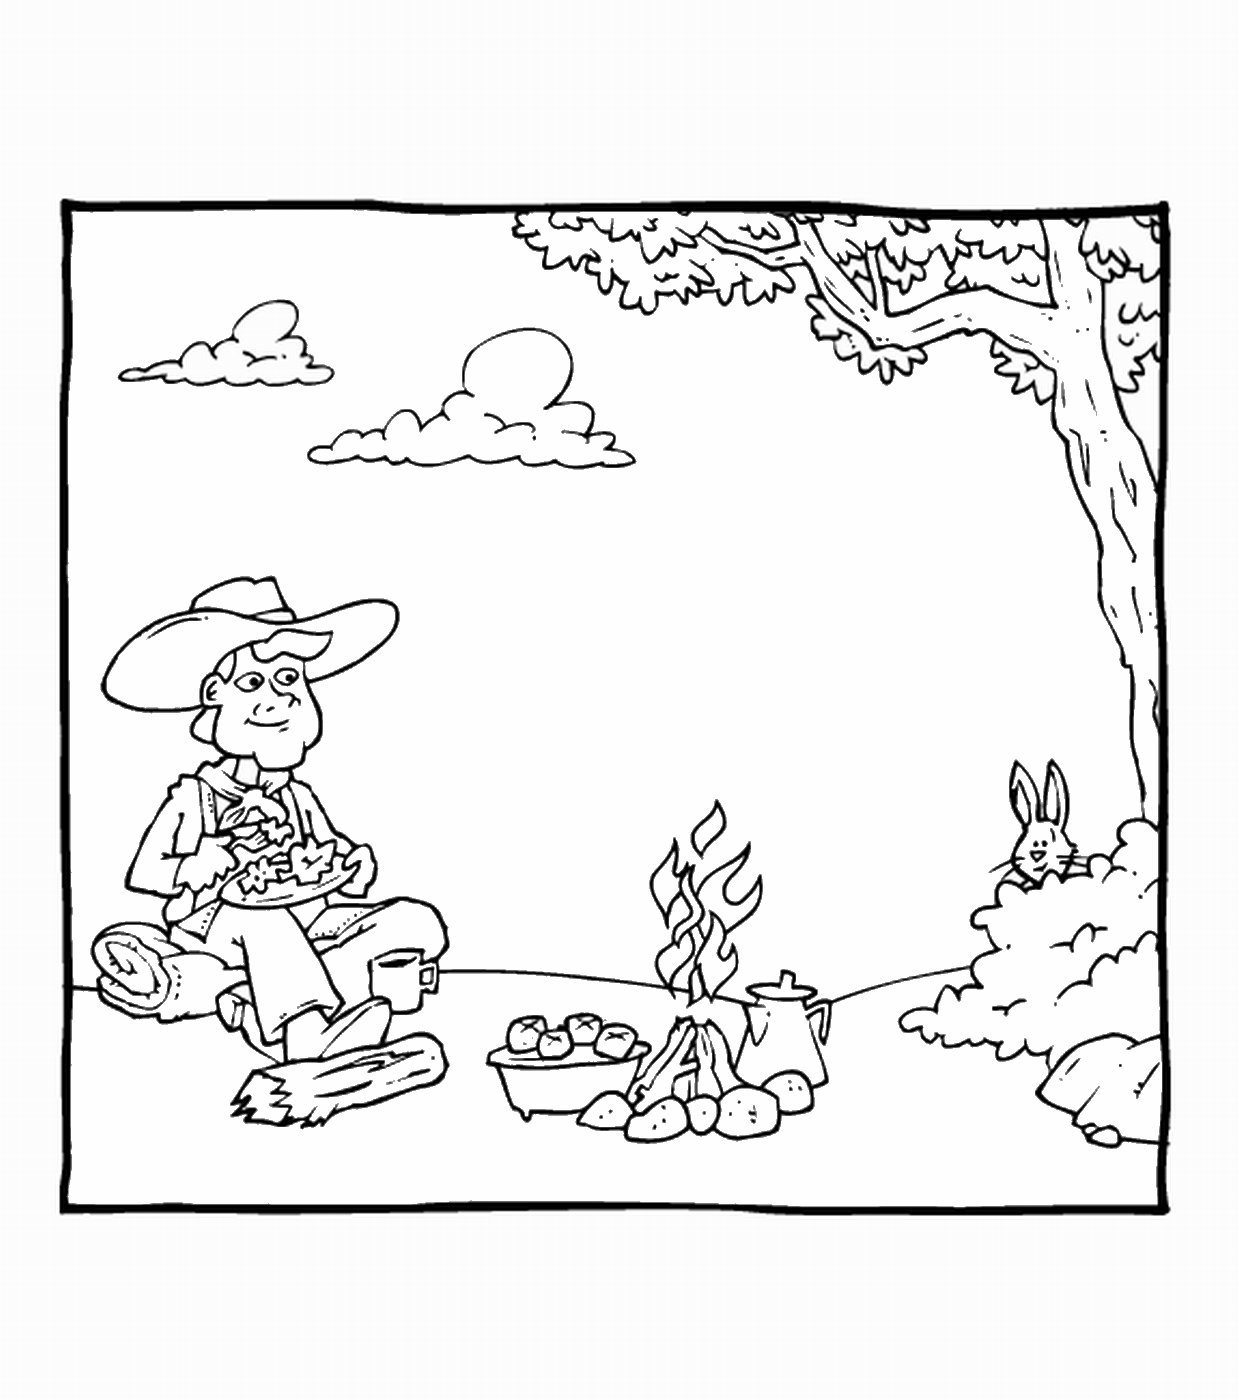 Cowboy Coloring Pages for boys cowboy_11 Printable 2020 0186 Coloring4free